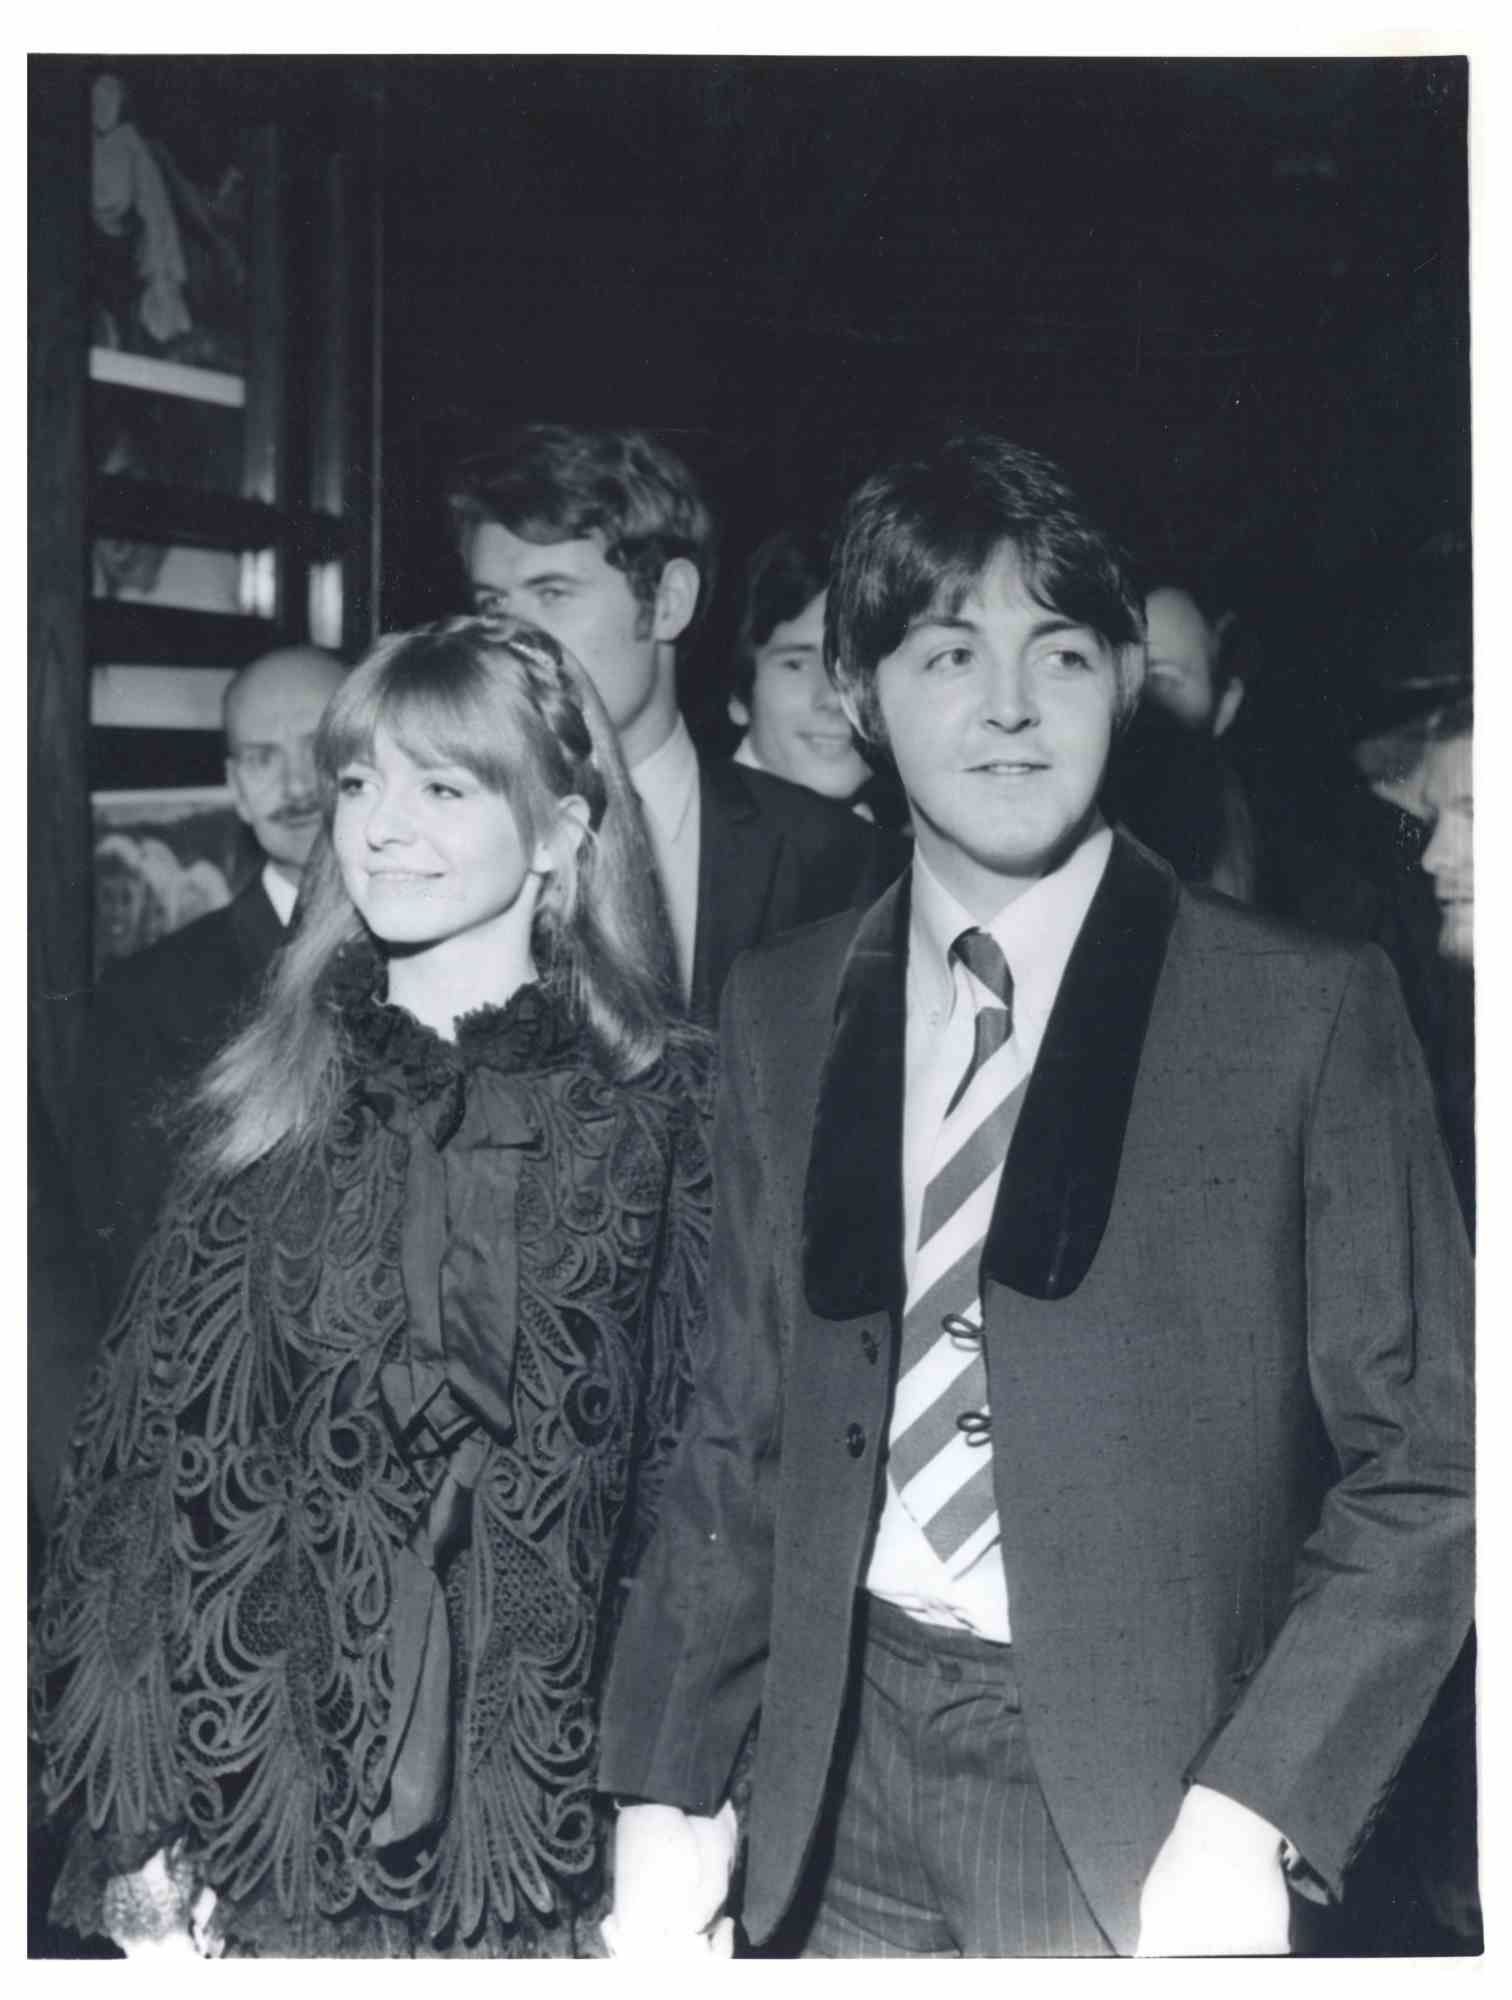 Paul McCartney and Jane Asher in 1968 wallector image